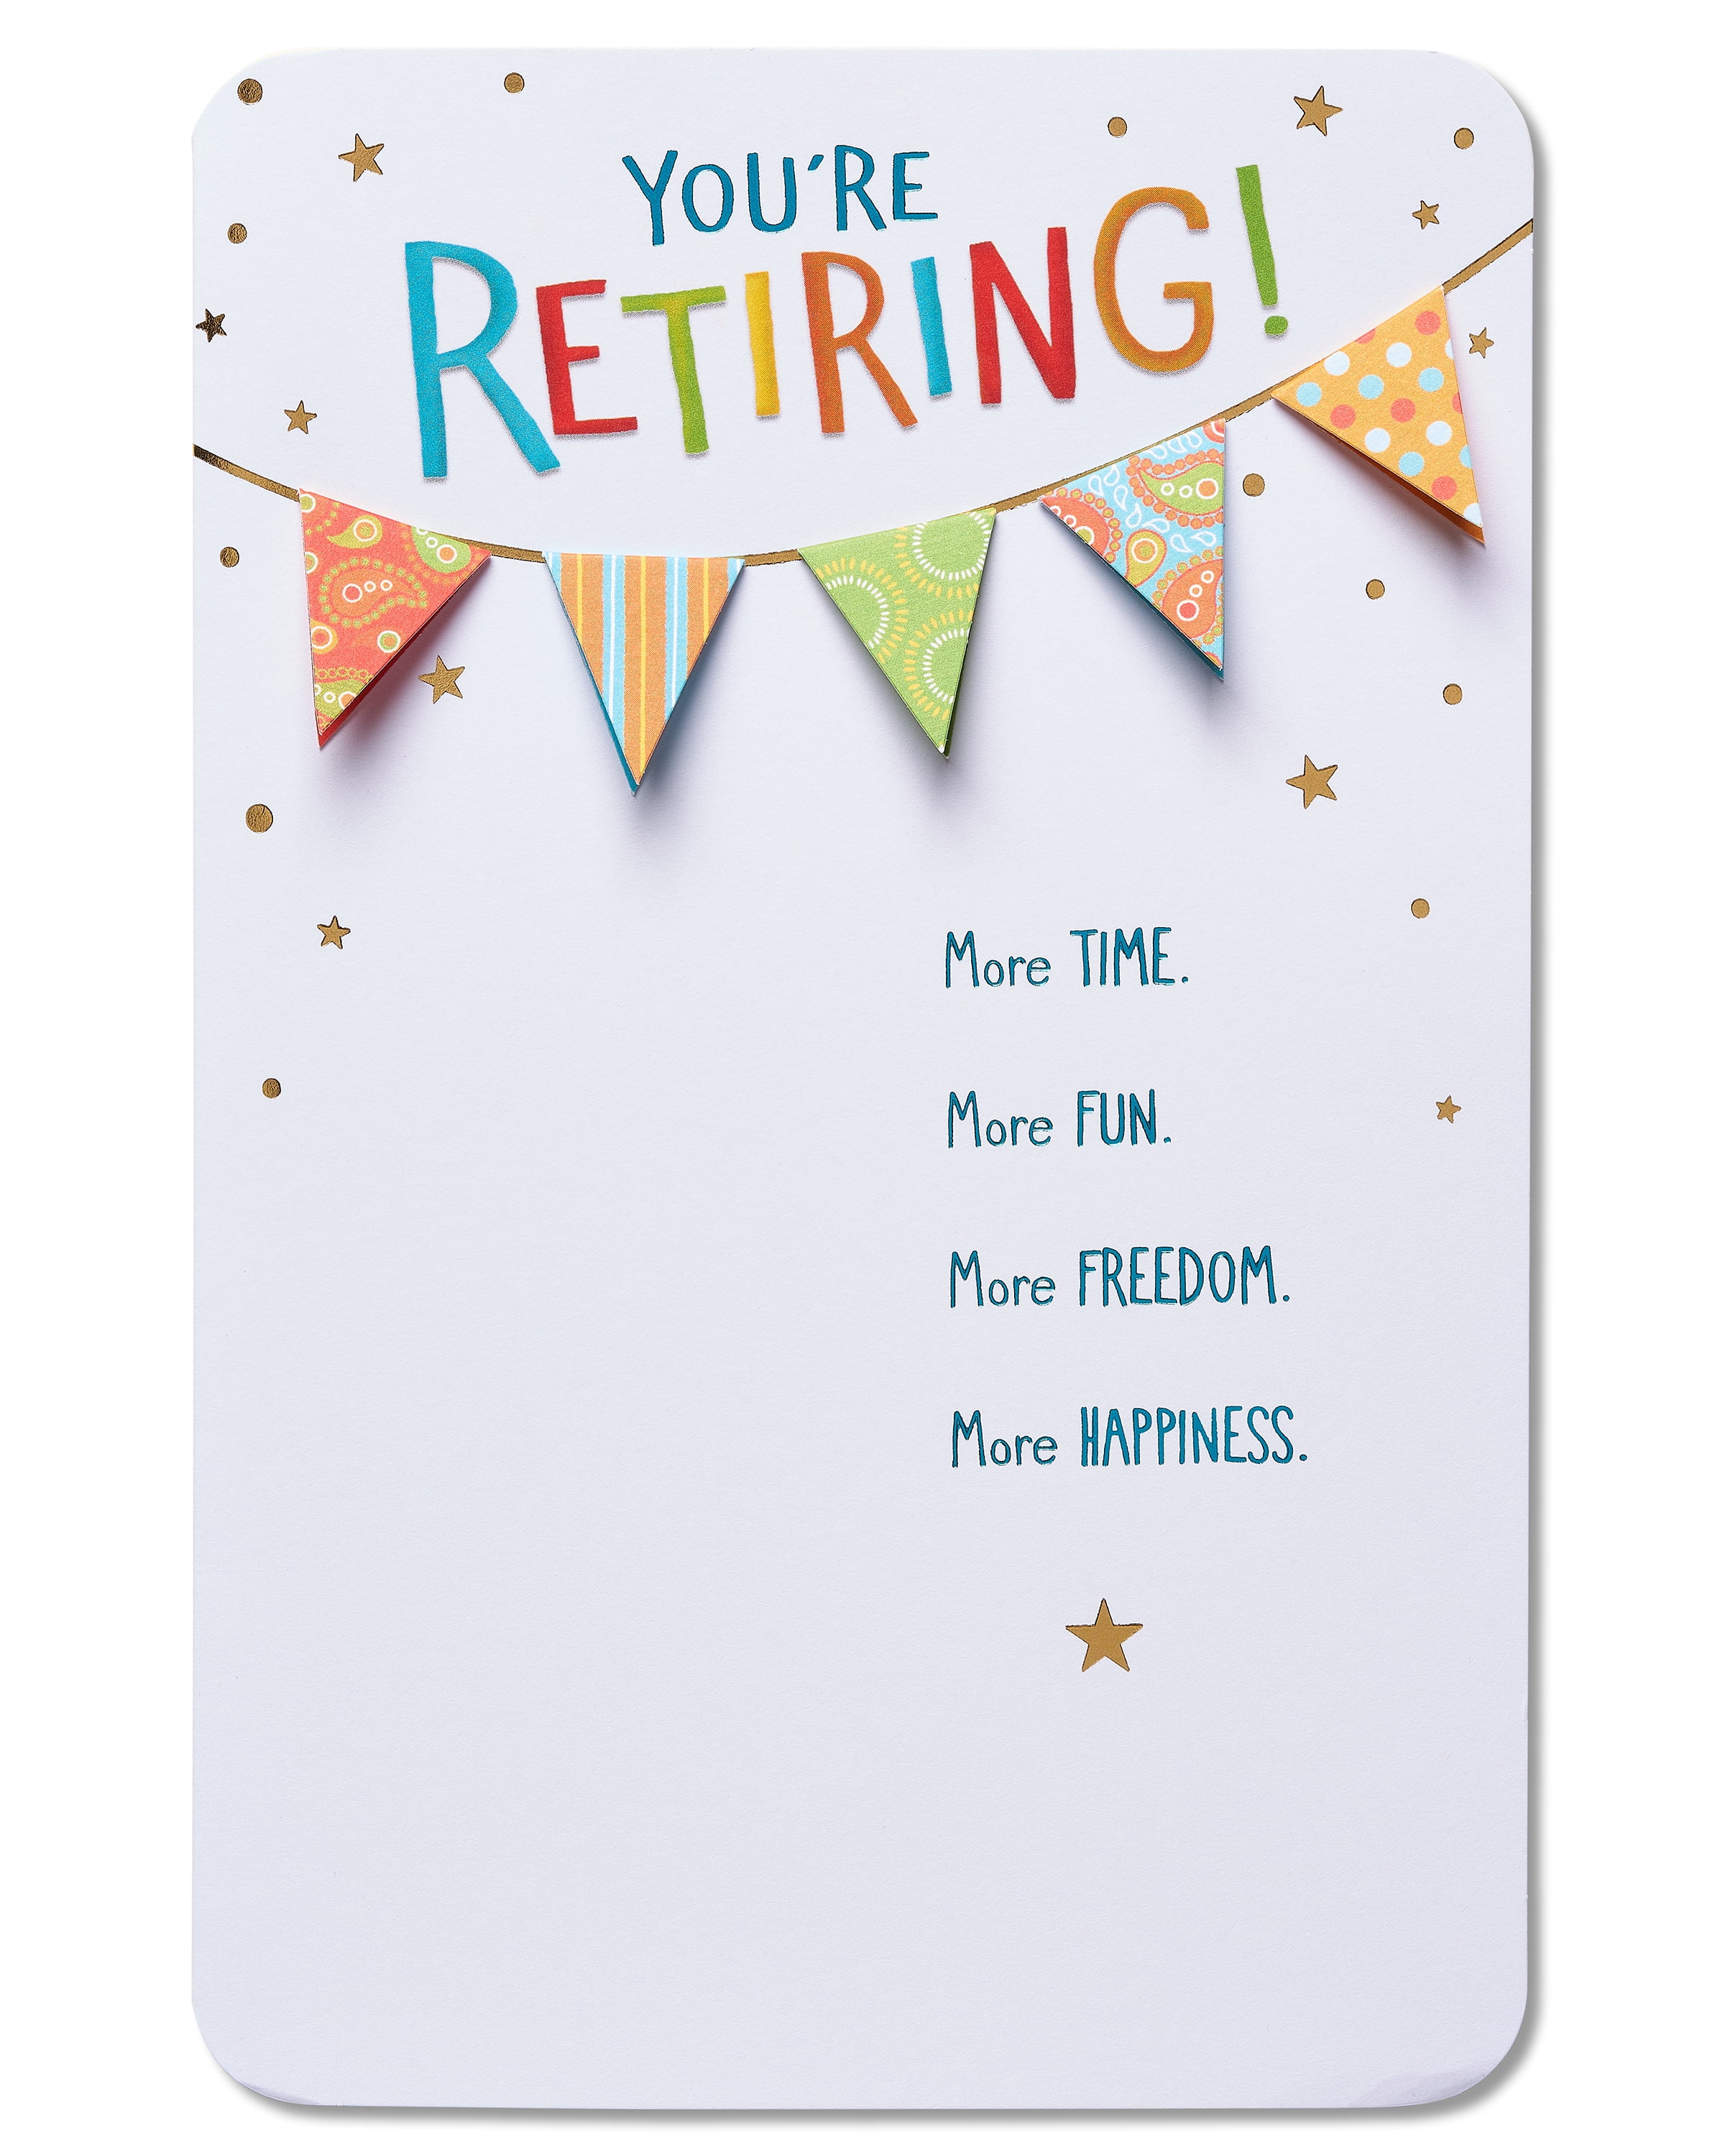 Download Printable Greeting Cards Retirement Images Printables Collection